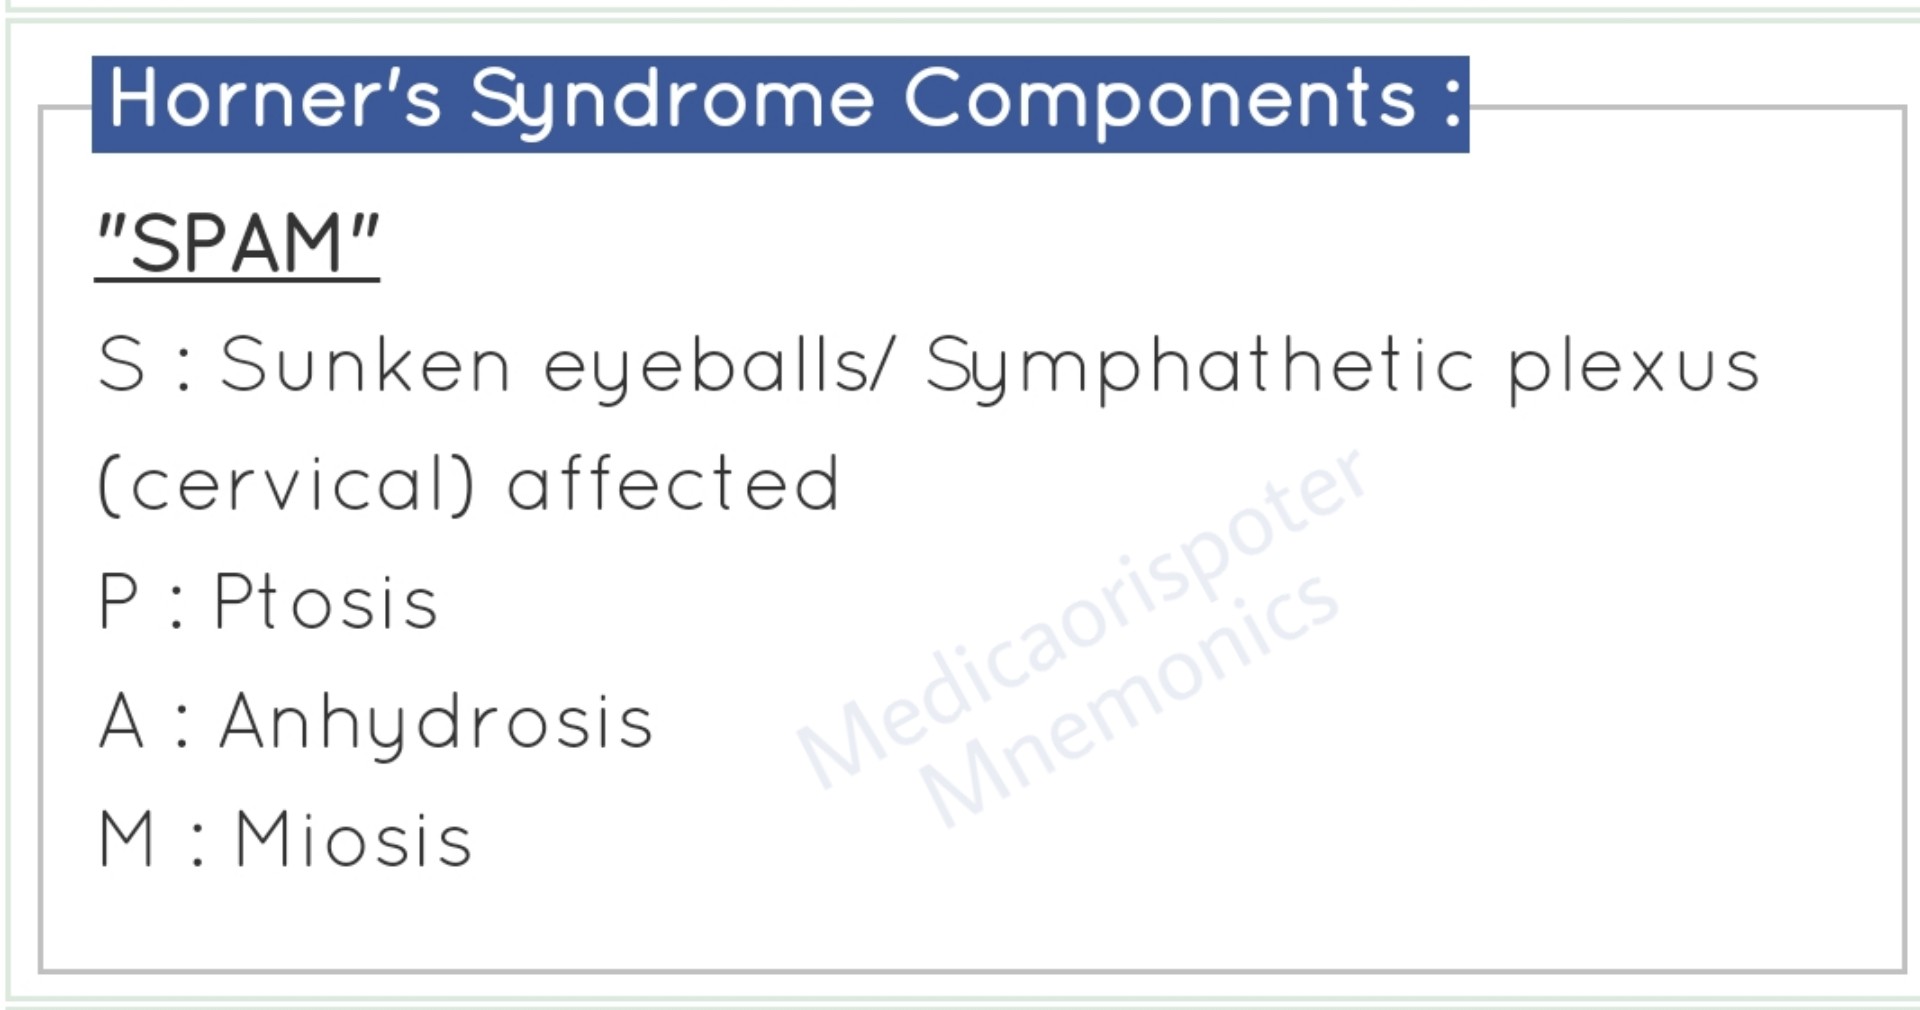 Components_of_Horners_Syndrome